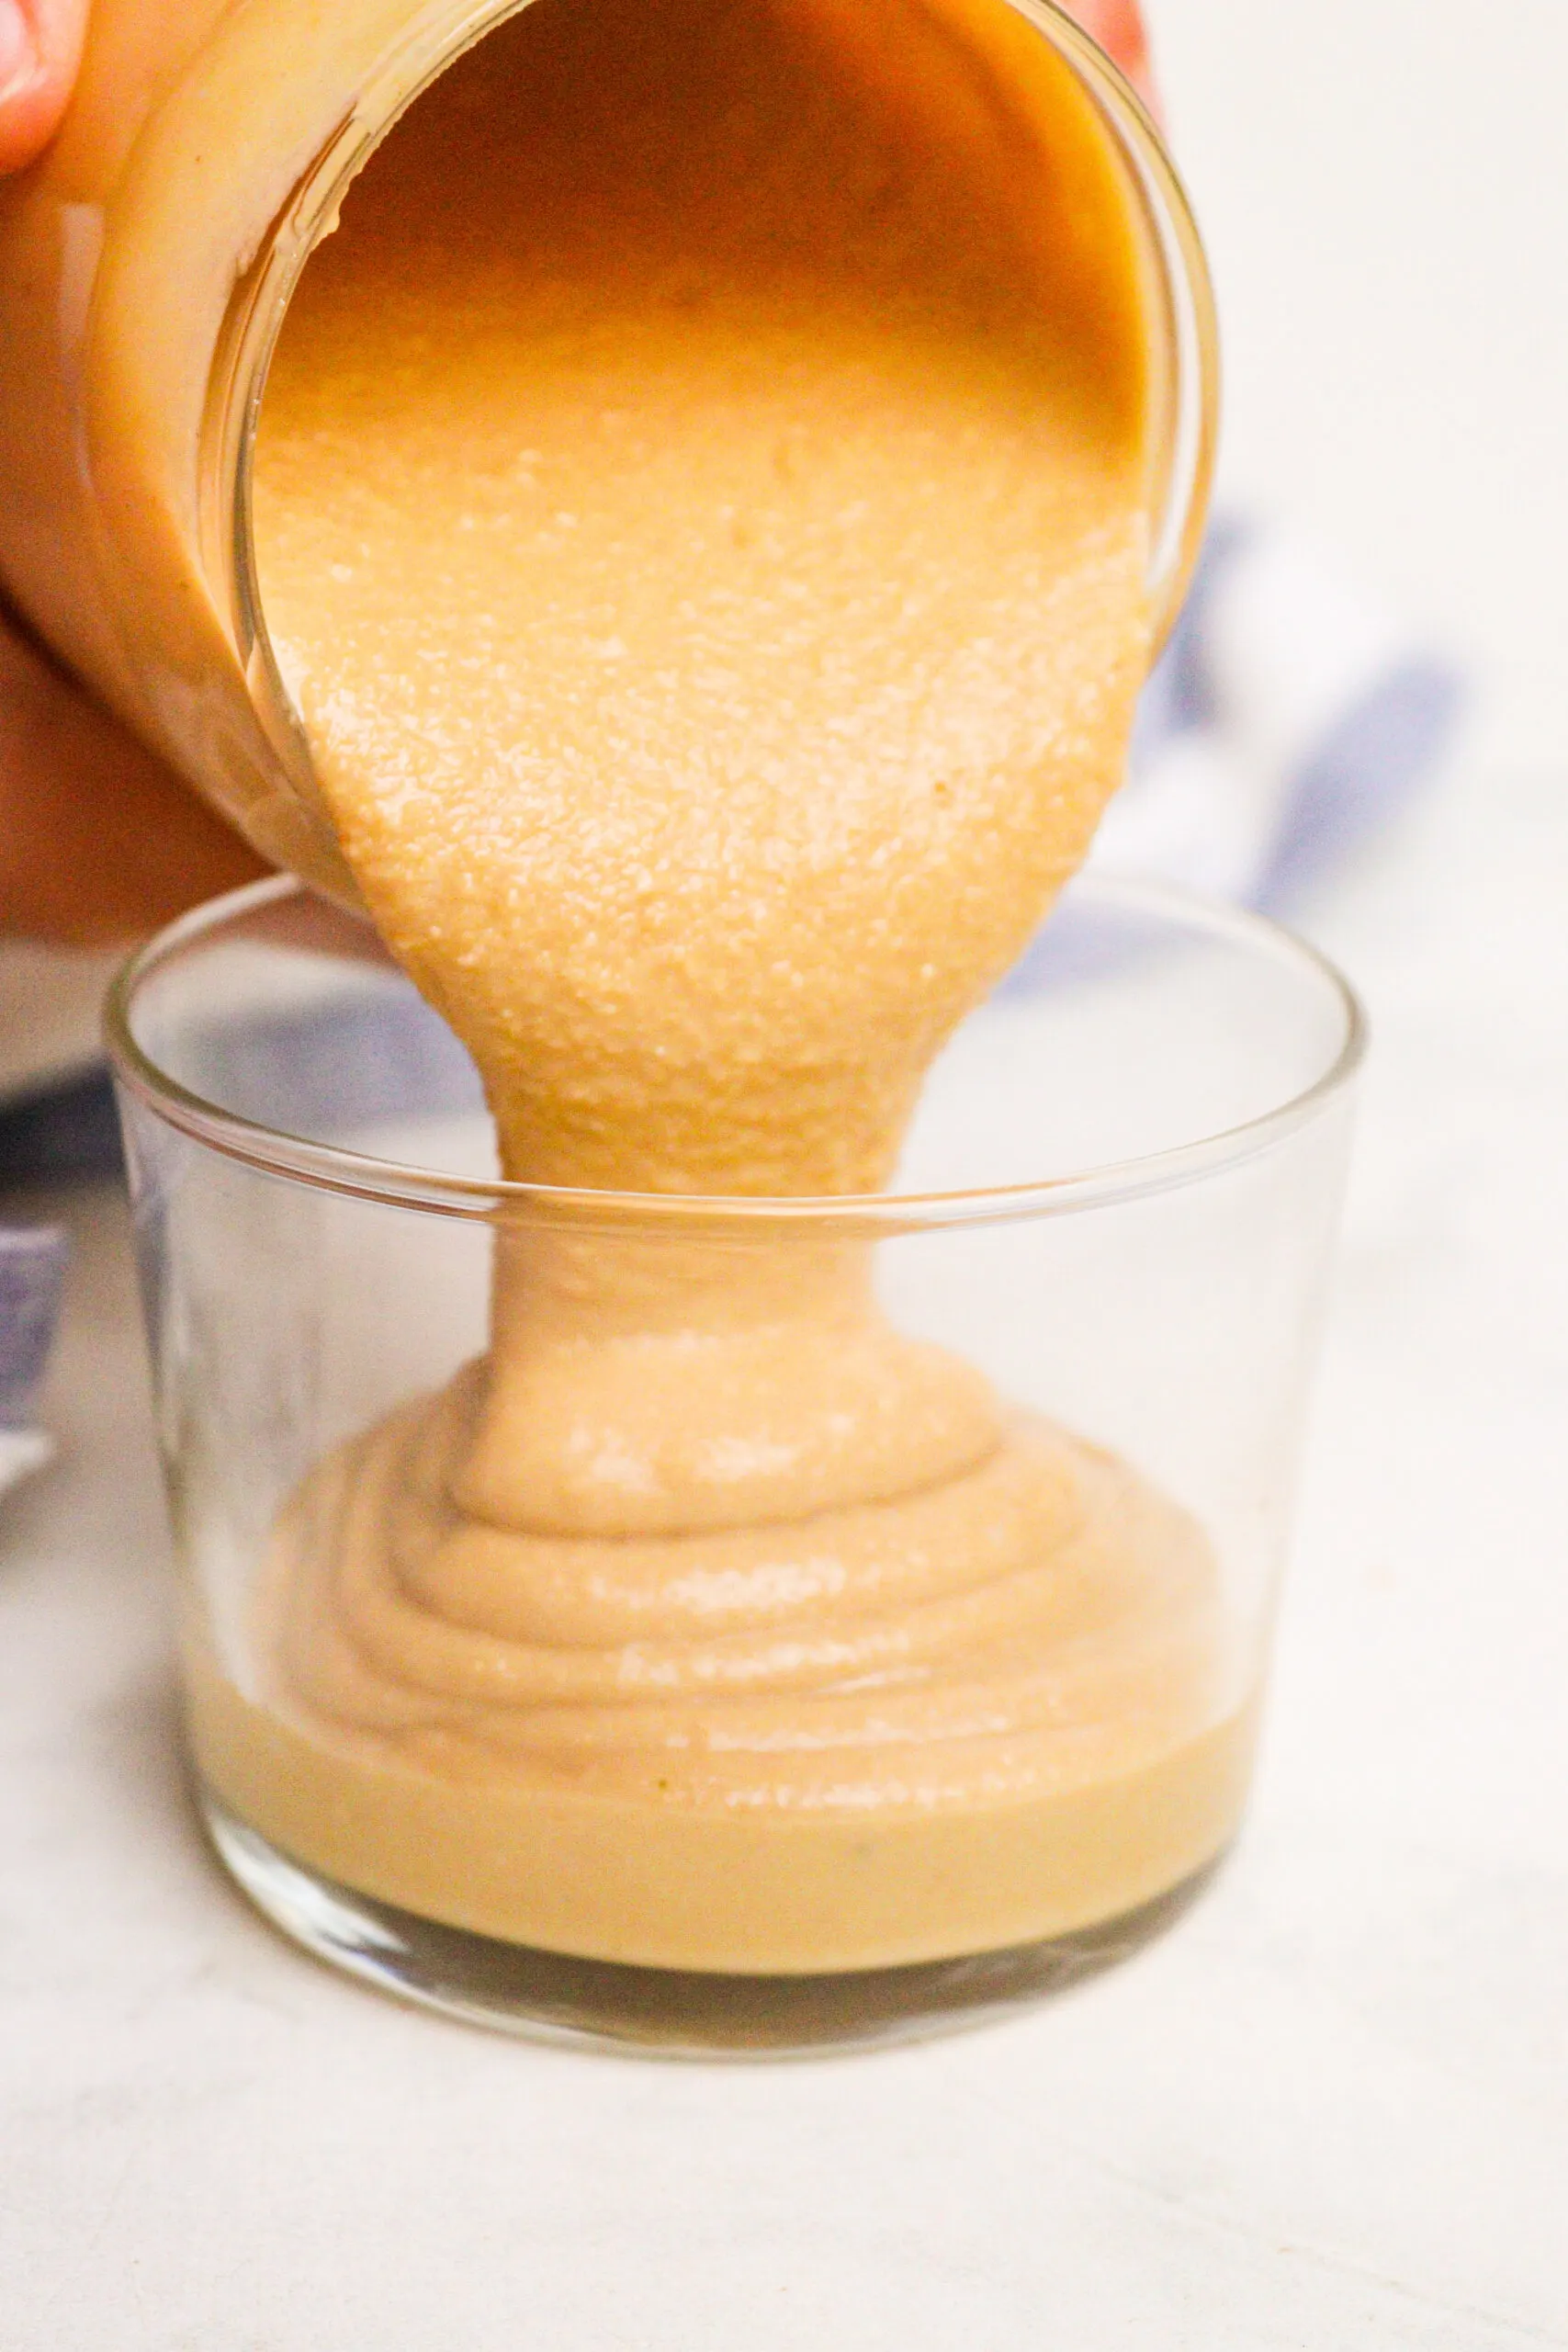 Homemade peanut butter in a cup